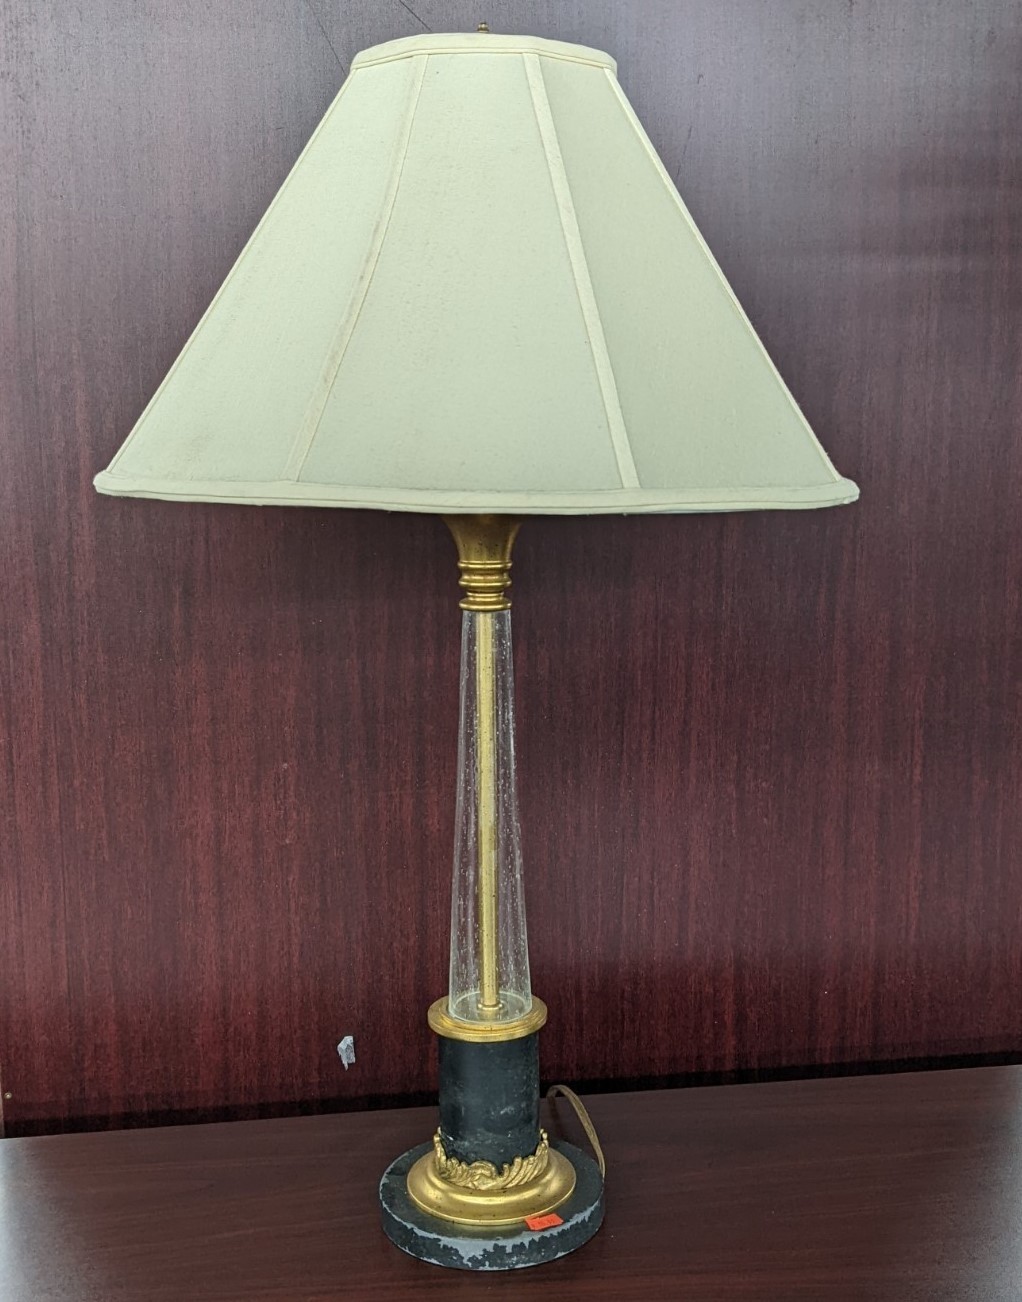 Used Table Lamp with Shade